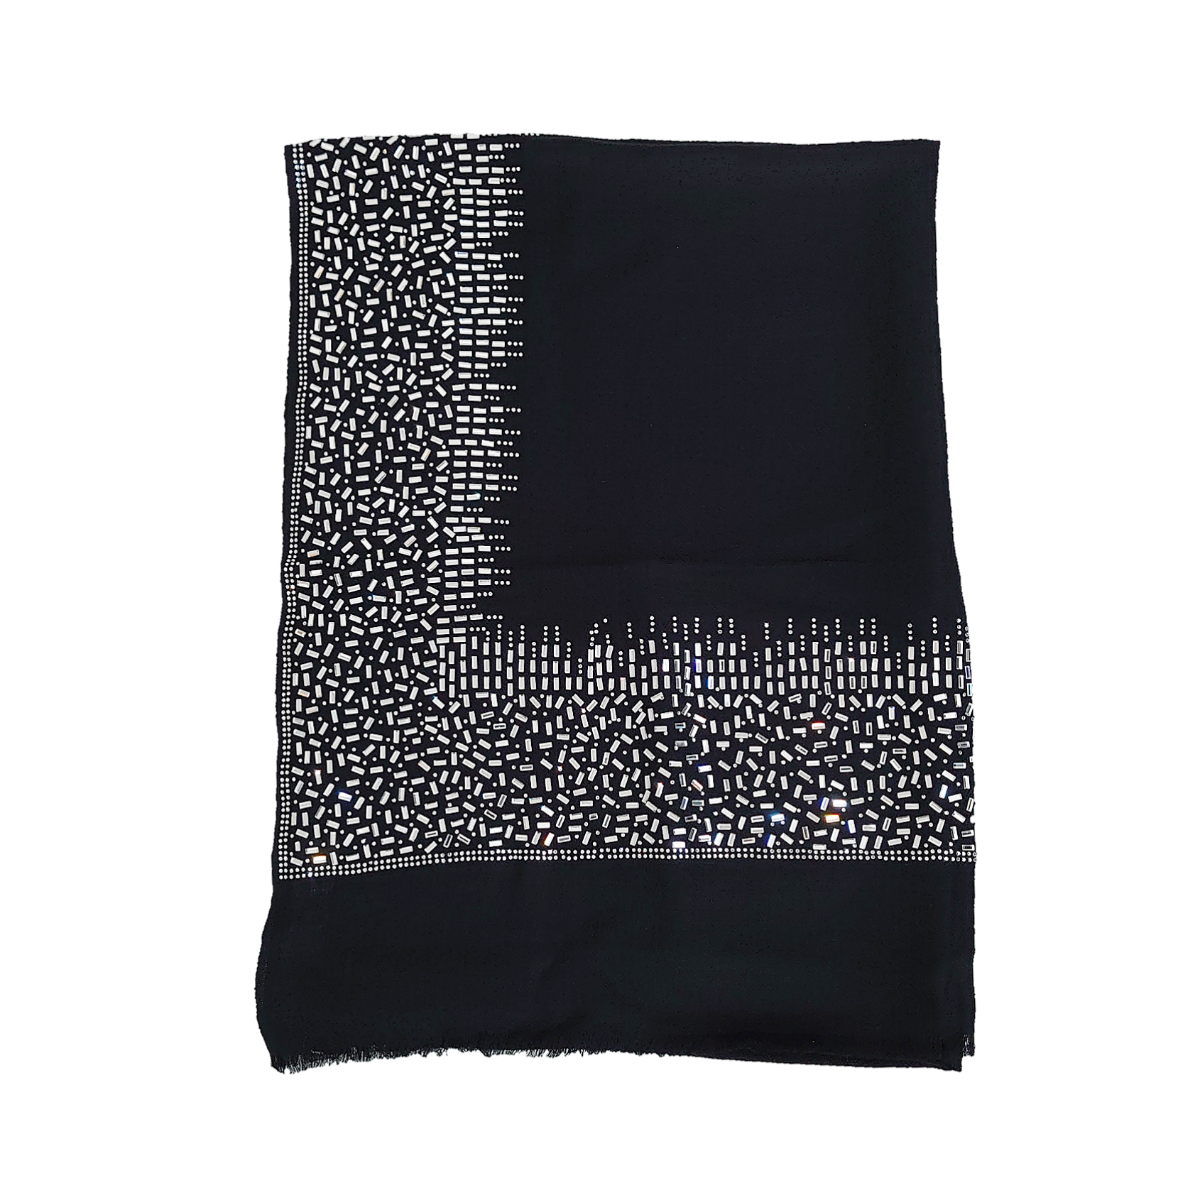 Exclusive, Limited Edition Luxury Pashmina Stole With Crystals - Black-Silver